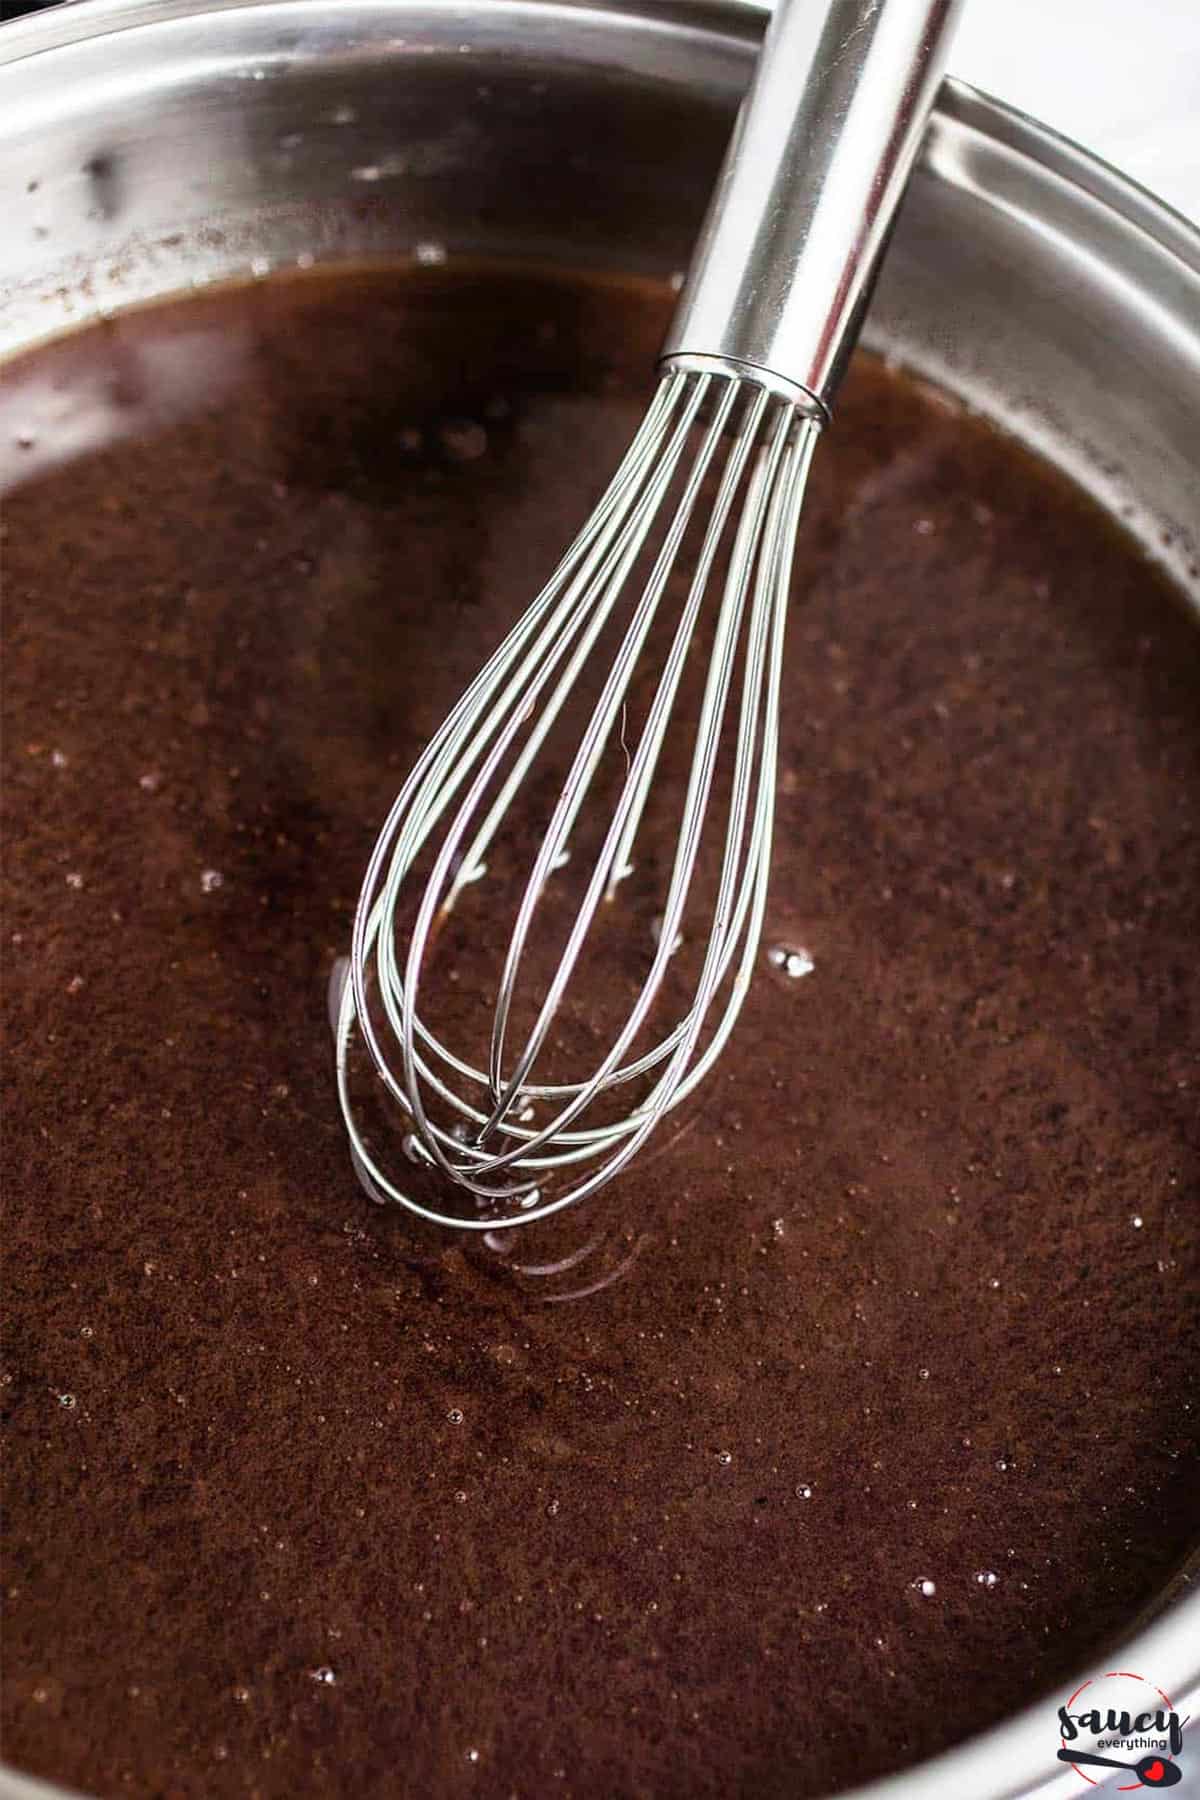 Complete au jus in pan with whisk